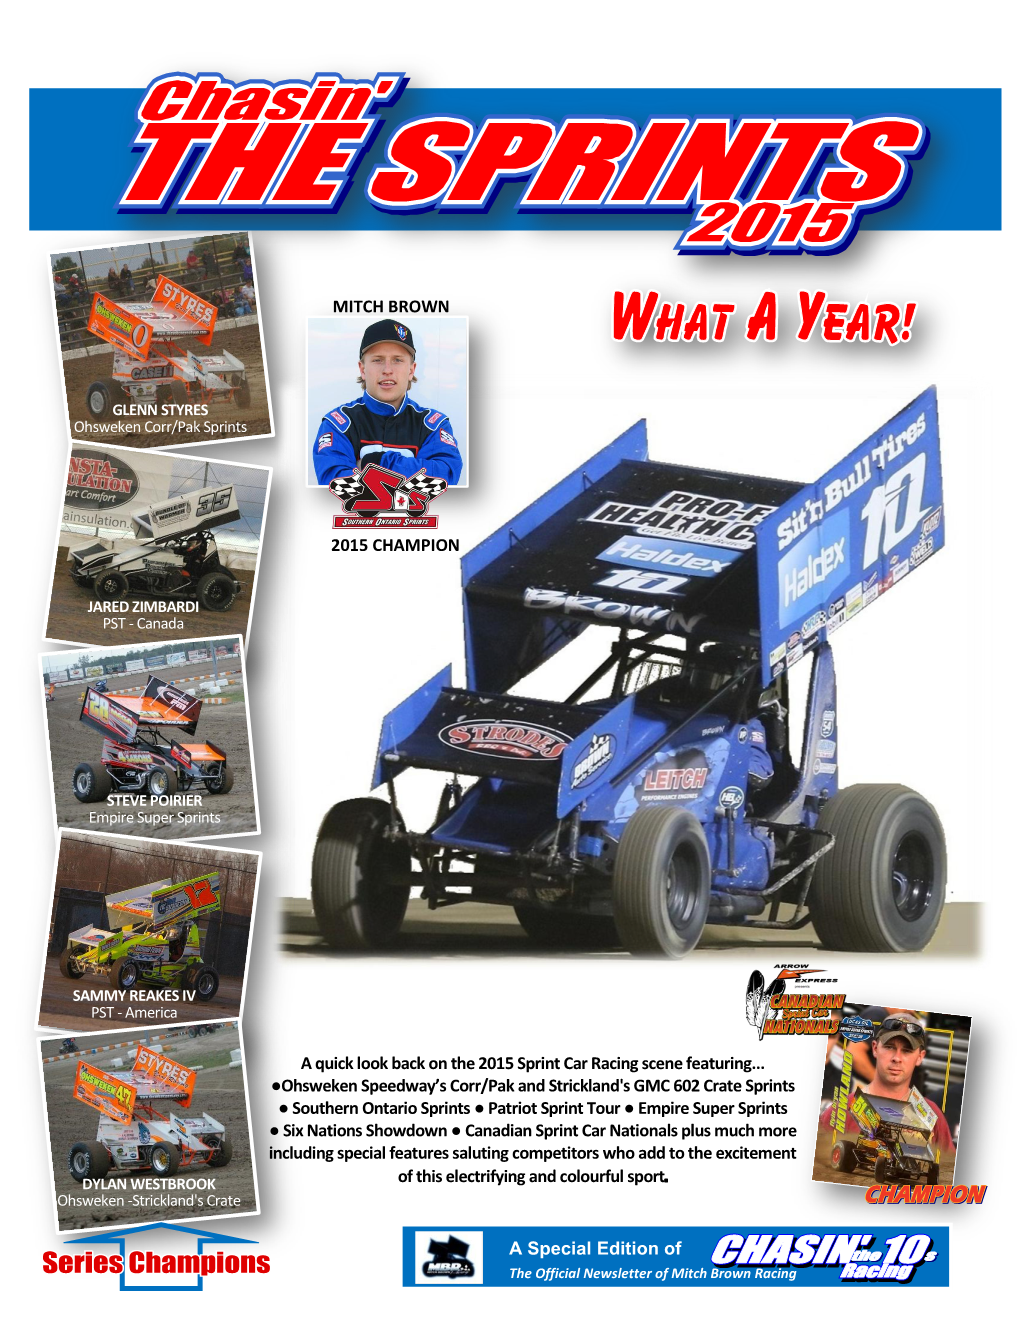 MITCH BROWN 2015 CHAMPION a Quick Look Back on The2015 Sprint